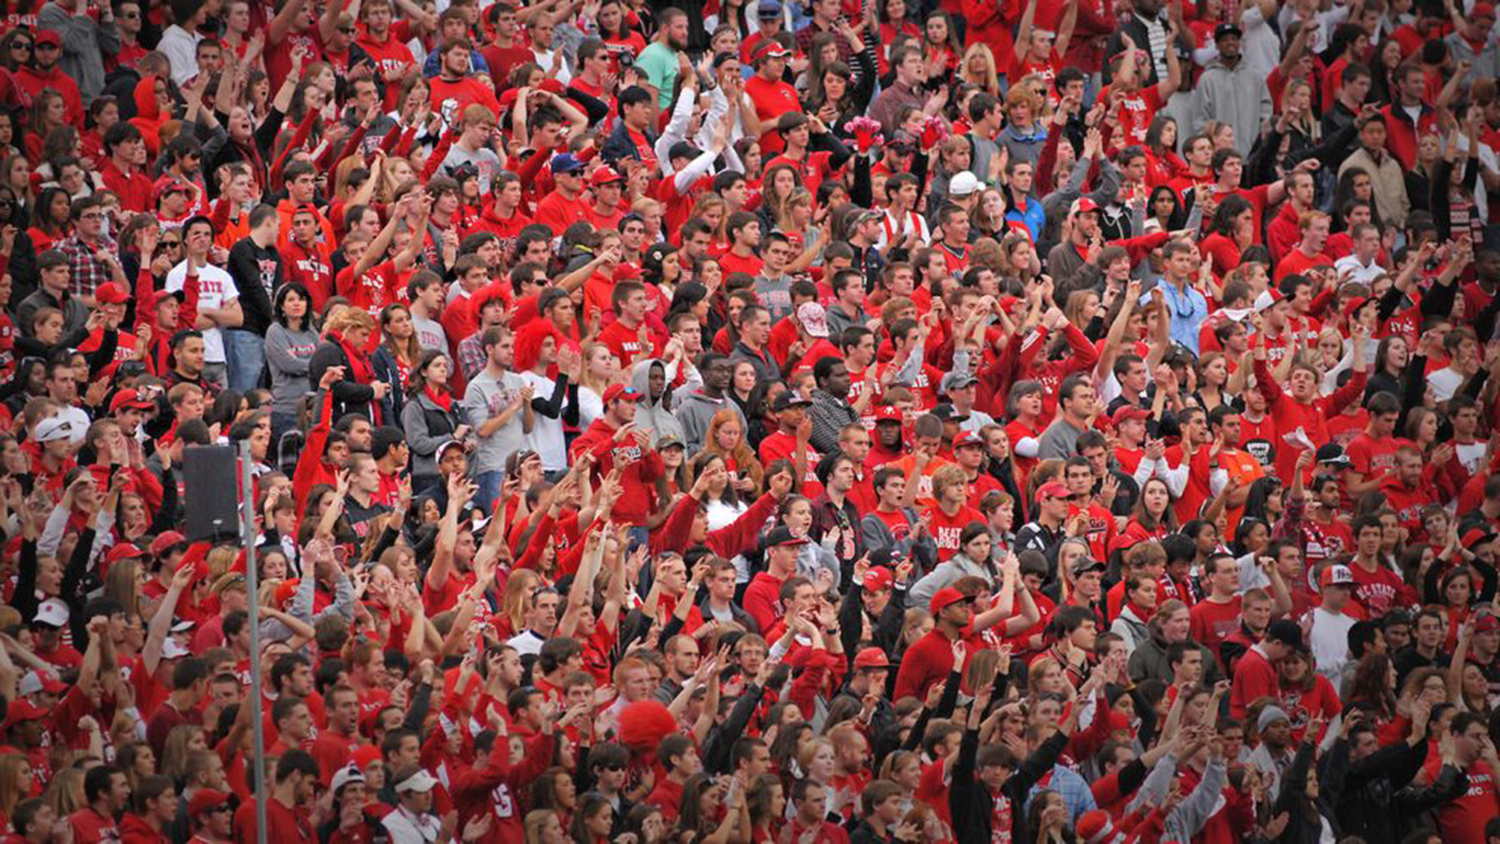 Cheering crowd at an NC State football game.